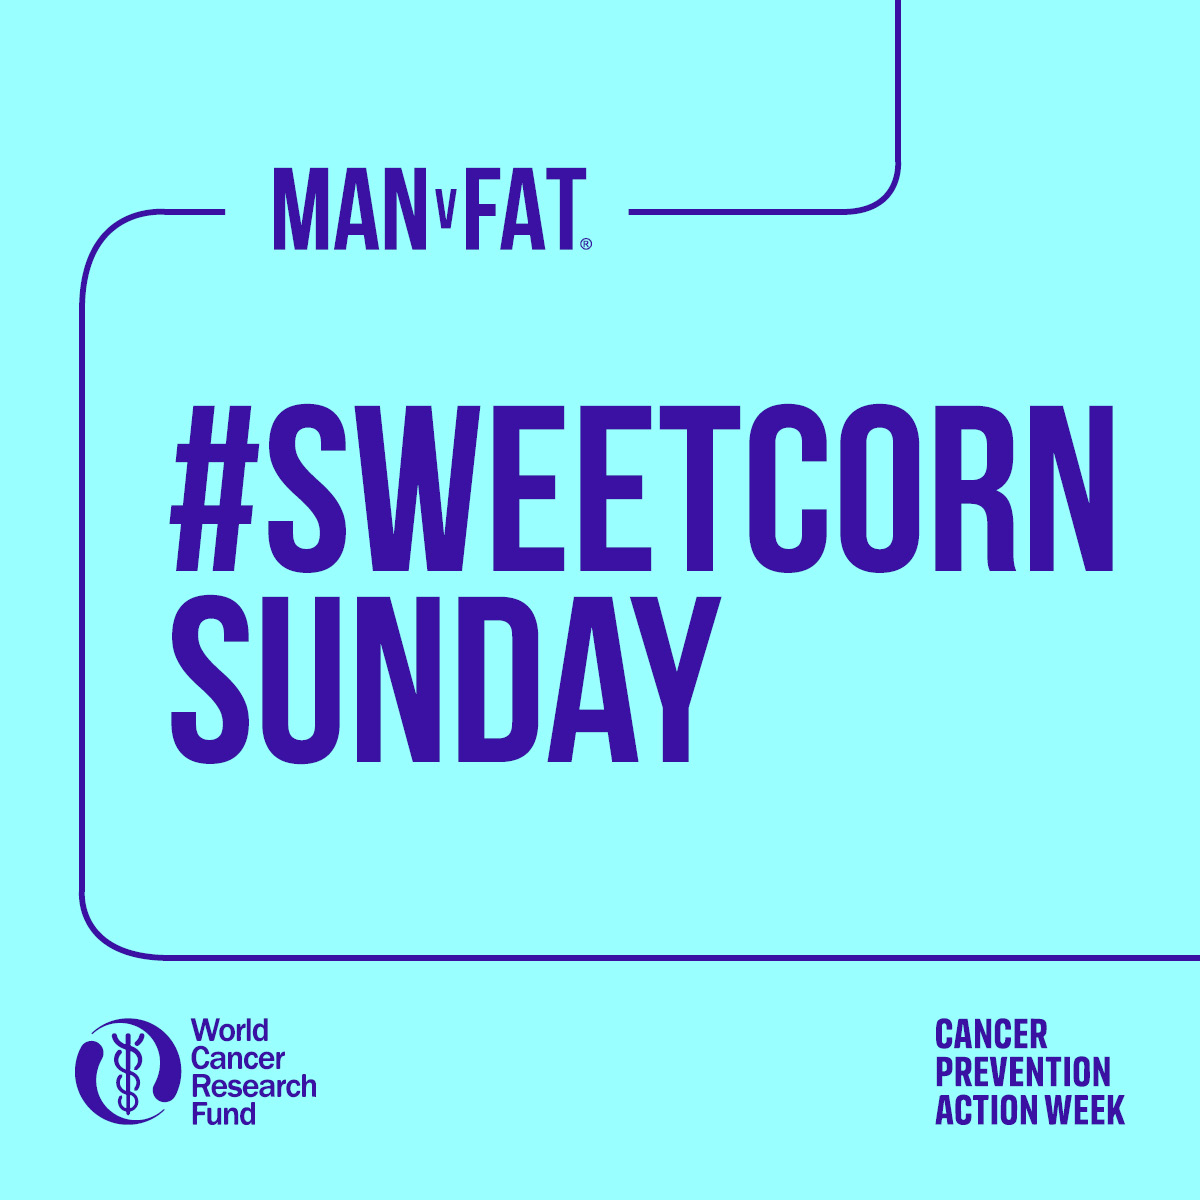 This week is Cancer Prevention Awareness week #CPAW23.

@WCRF_UK is launching the Great British Sarnie Swap #SarnieSwap to encourage people to reduce how much processed meat they eat and we’re encouraging our members to do the same!
Today's theme is #sweetcornsunday

#manvfat